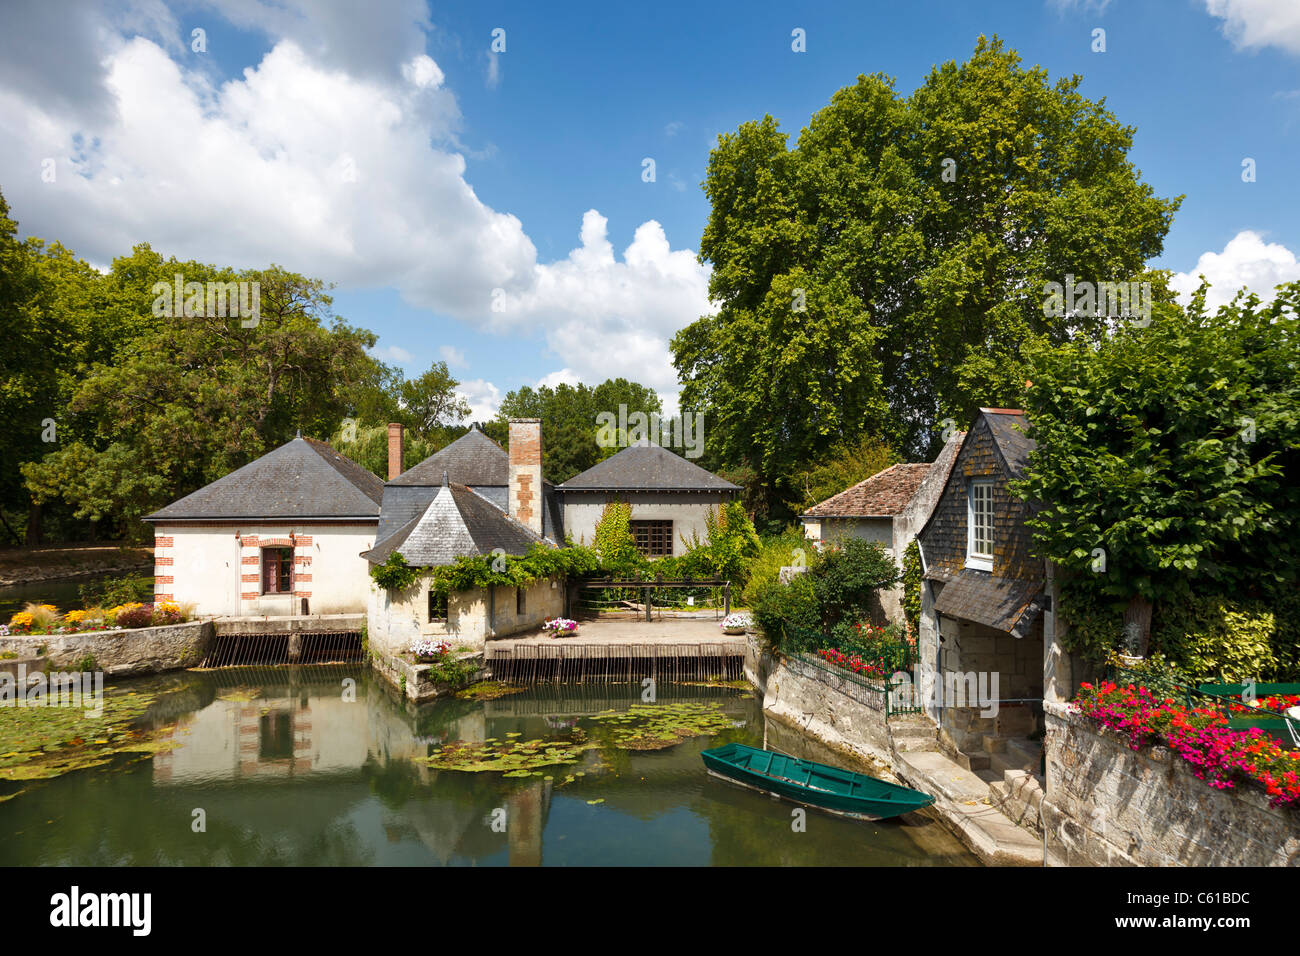 Loire, France - Boat house on the Indre River at Azay-le-Rideau, Indre et Loire, Loire Valley, France, Europe Stock Photo